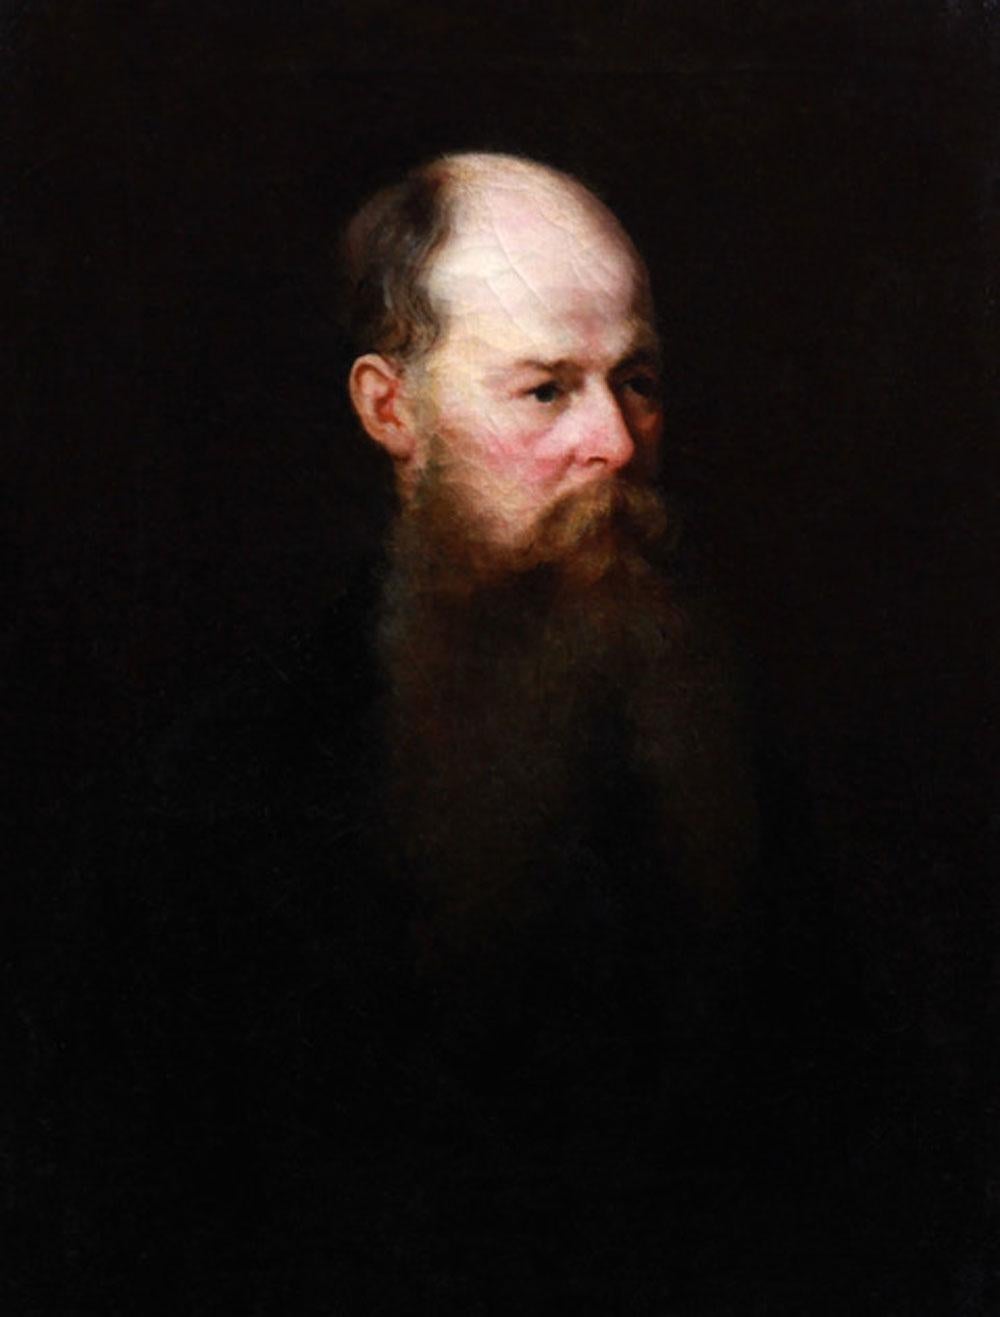 19th C. Russian Oil on Canvas Portrait Of Lev Tolstoy (1828-1910)

Leo Tolstoy, Tolstoy also spelled Tolstoi, Russian in full Lev Nikolayevich, Graf (count) Tolstoy, (born August 28 [September 9, New Style], 1828, Yasnaya Polyana, Tula province,